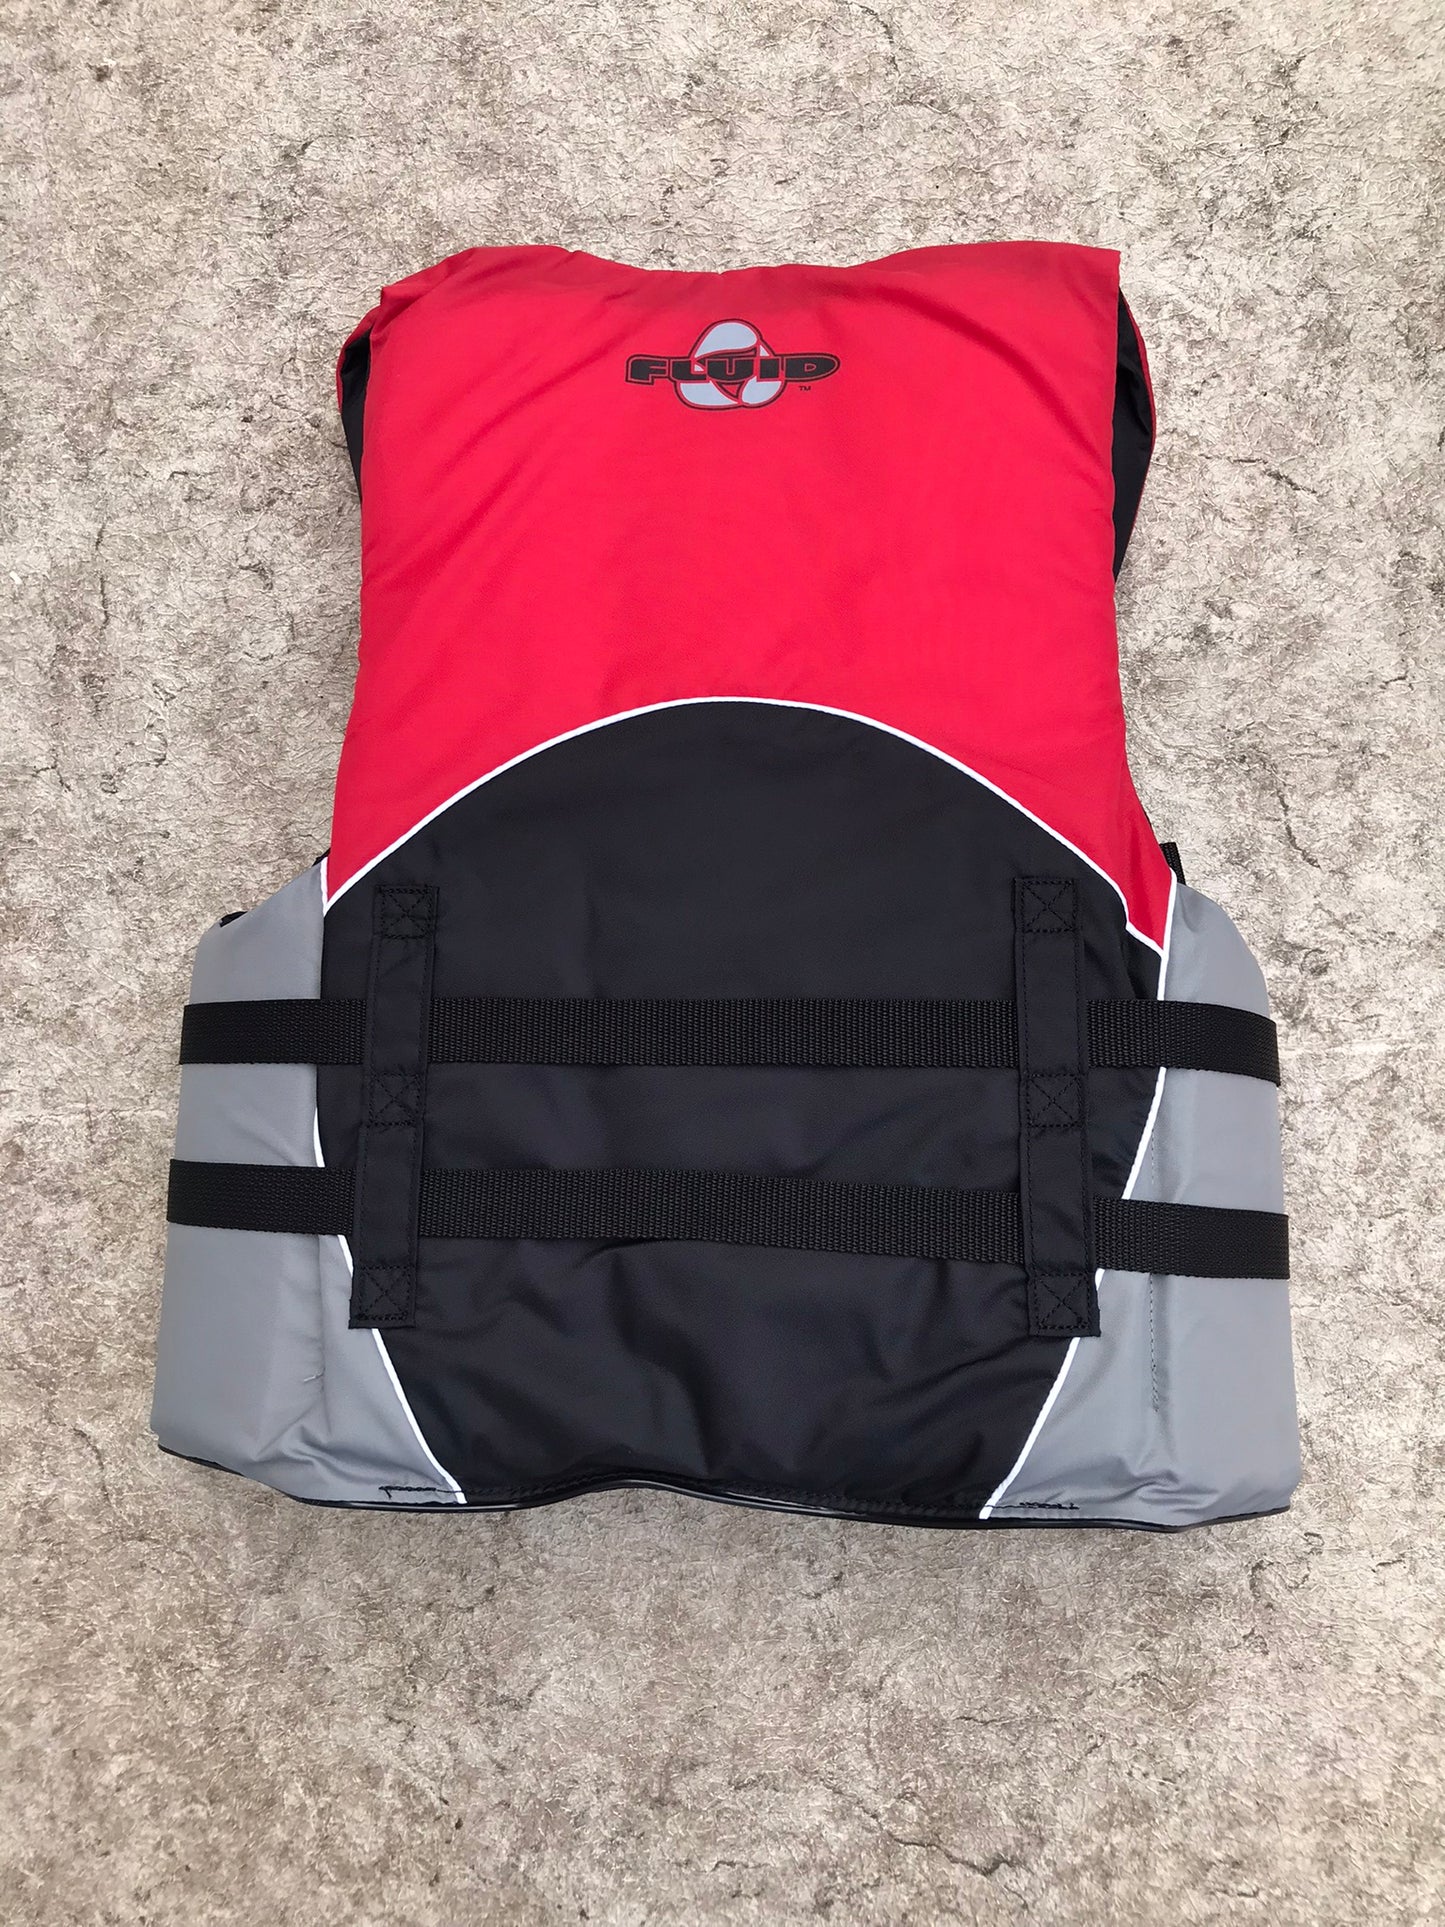 Life Jacket Adult Small  Fluid Black Red New Demo Model